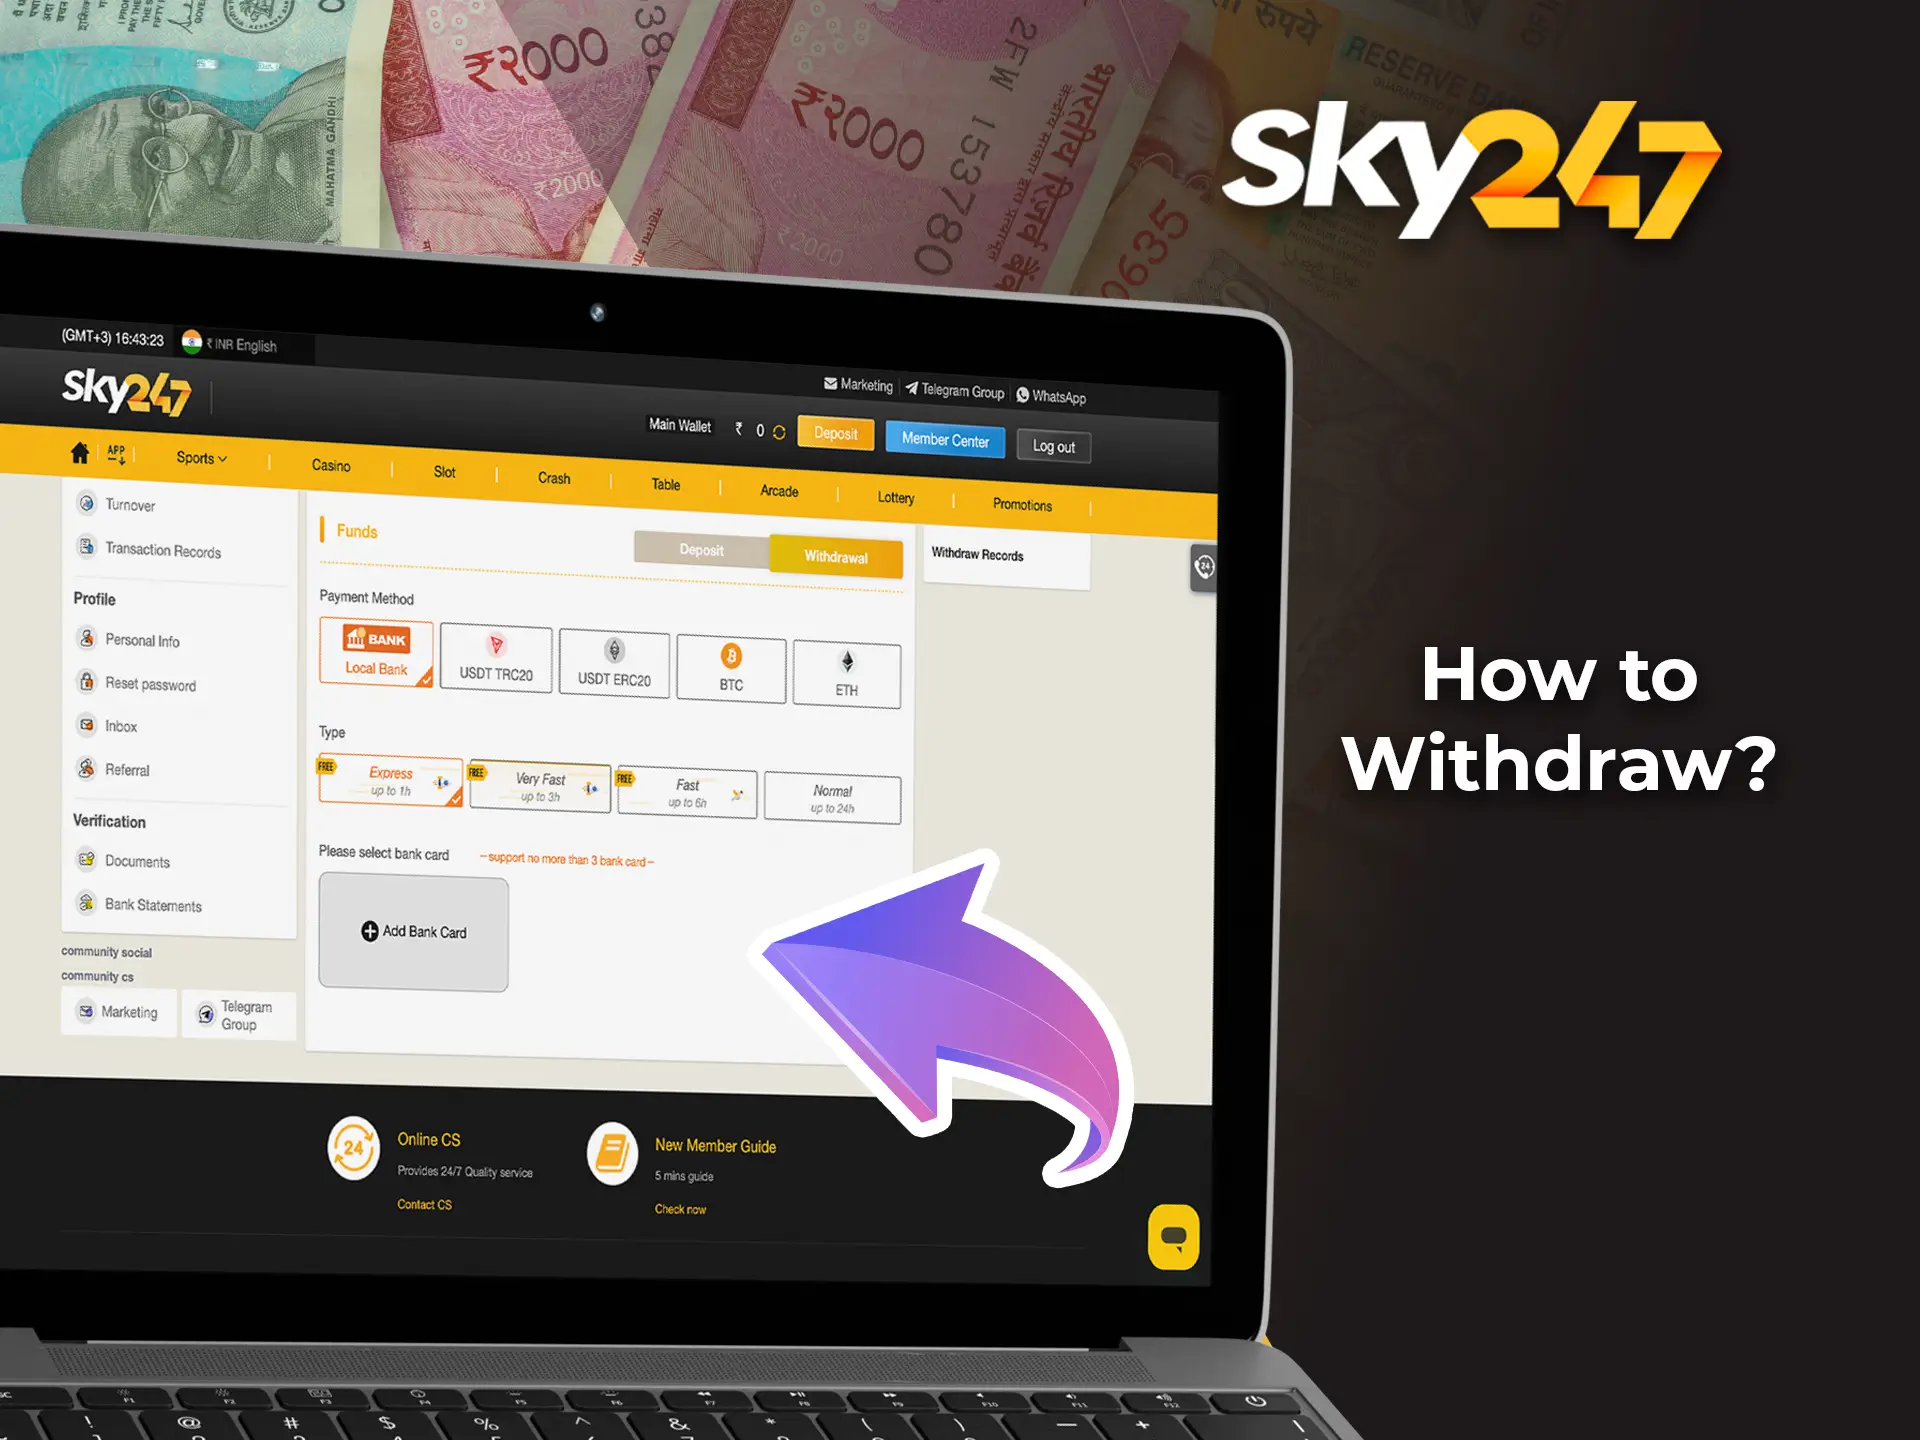 Withdraw your winnings at Sky247 Casino in a way that is convenient for you.